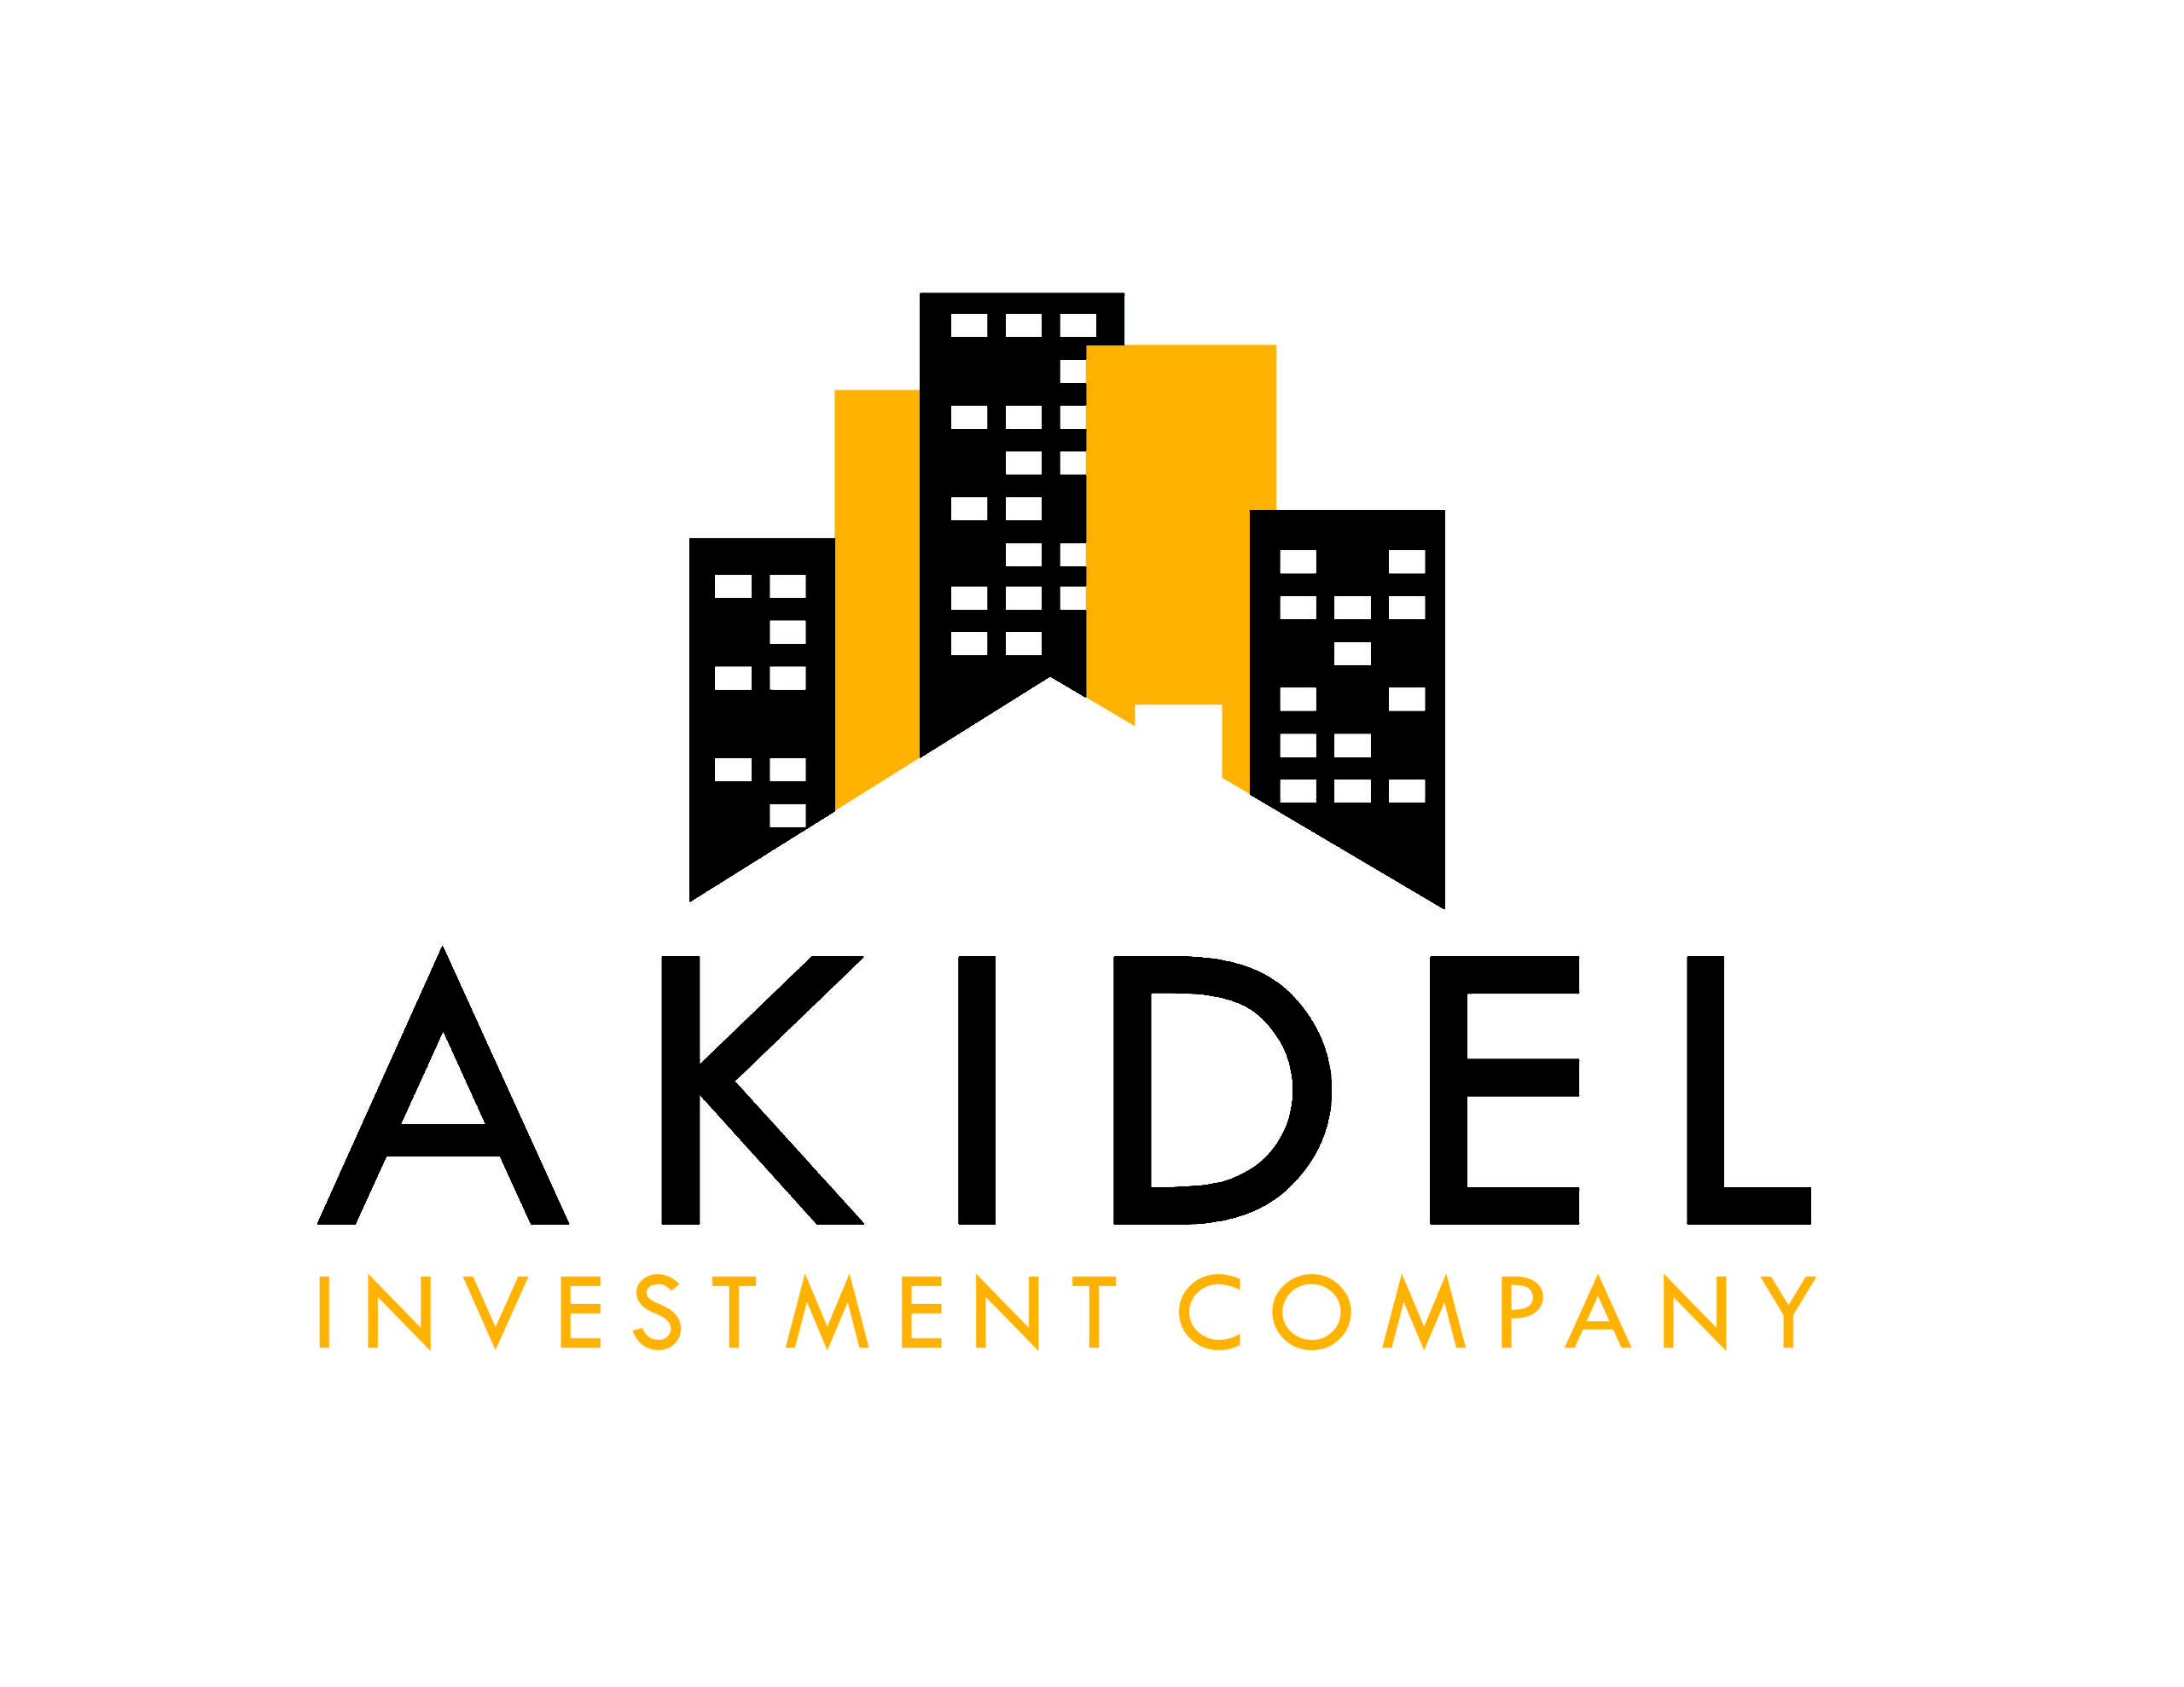 Akidel Investment Company